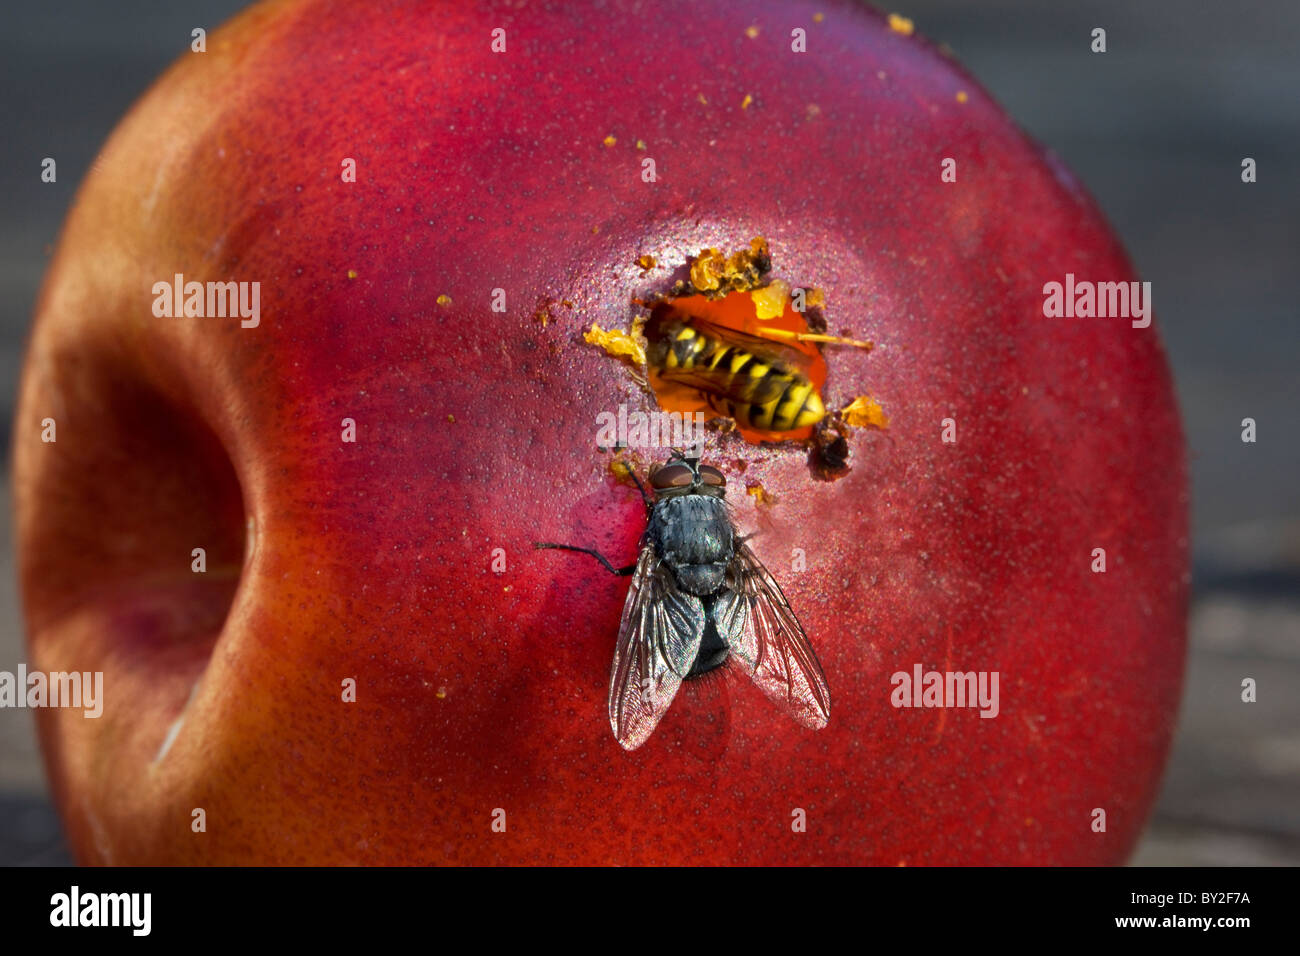 Wasp and fly eating red apple, Belgium Stock Photo